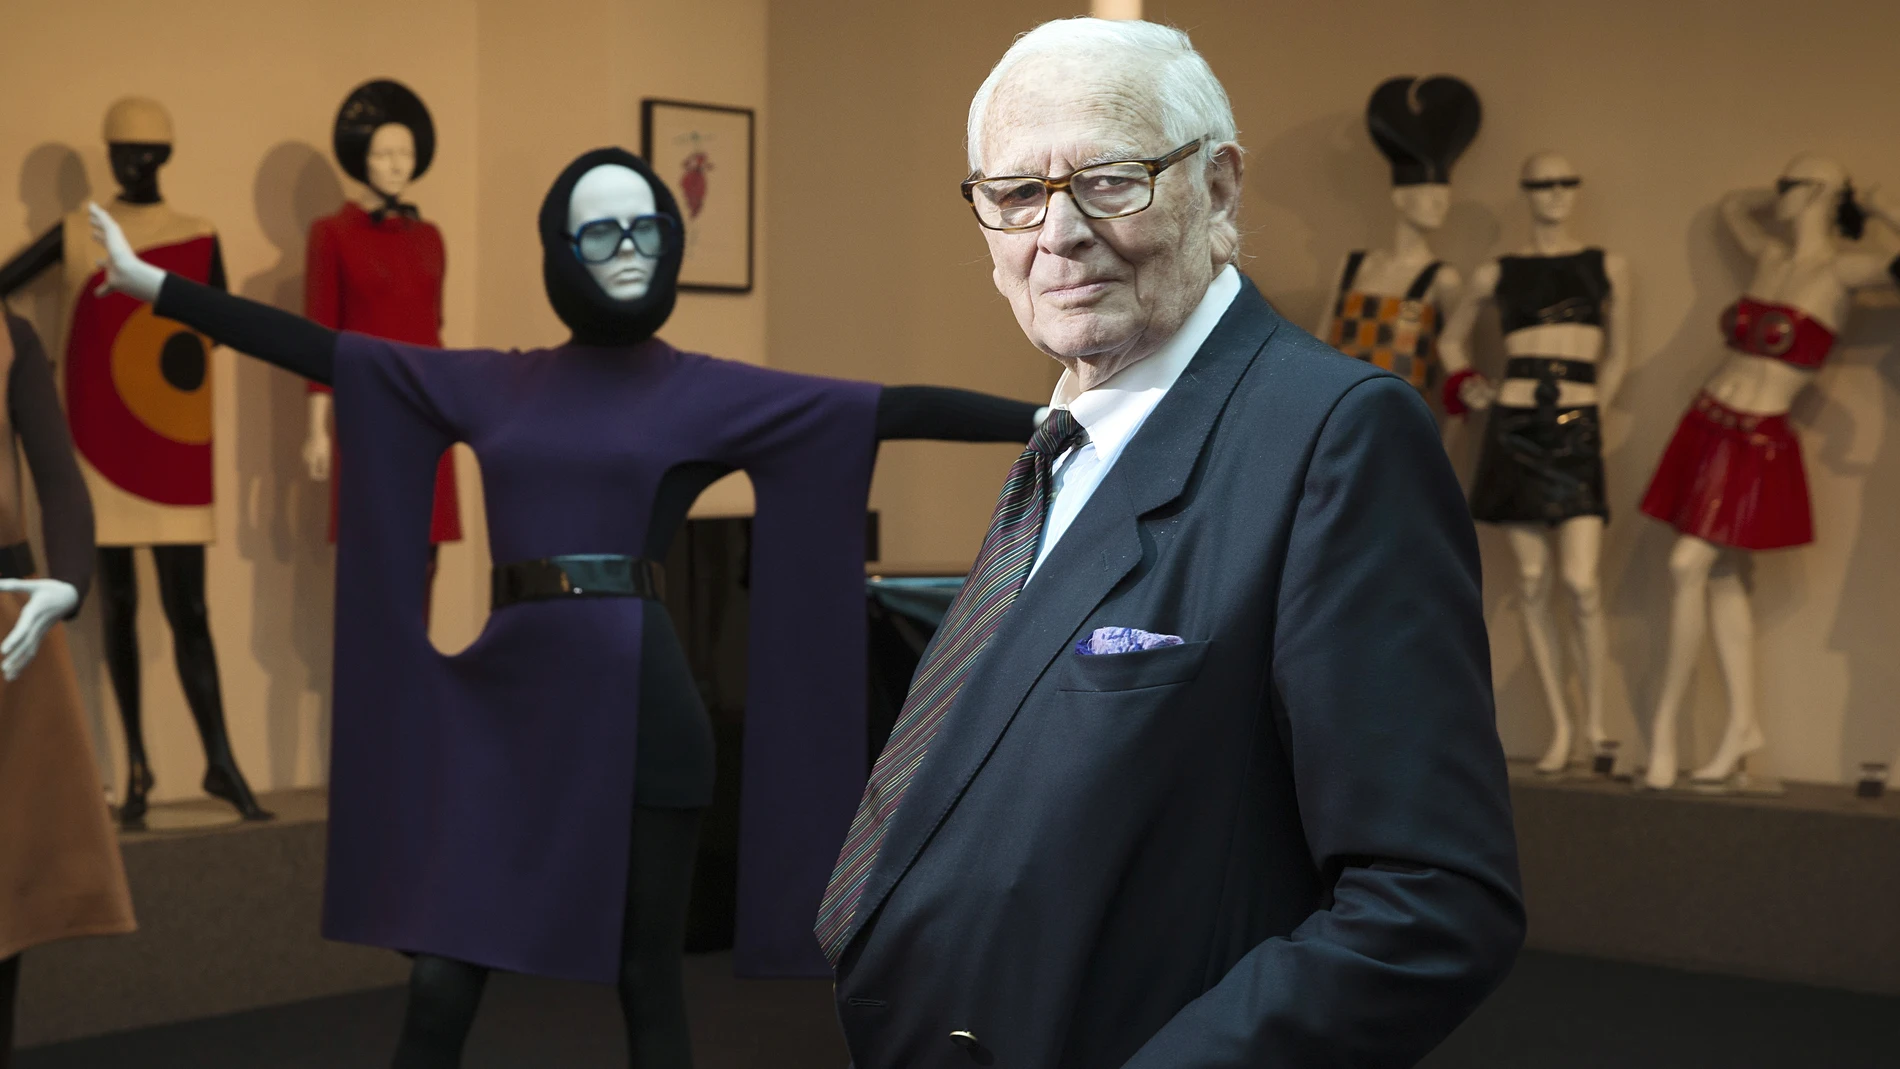 French designer Pierre Cardin poses on November 4, 2014 in his new musem, called "Passe-Present-Futur" ("Past-Present-Future"), which presents 200 Haute Couture outfits in Paris. Cardin, 92, will inaugurate the new museum on November 13.